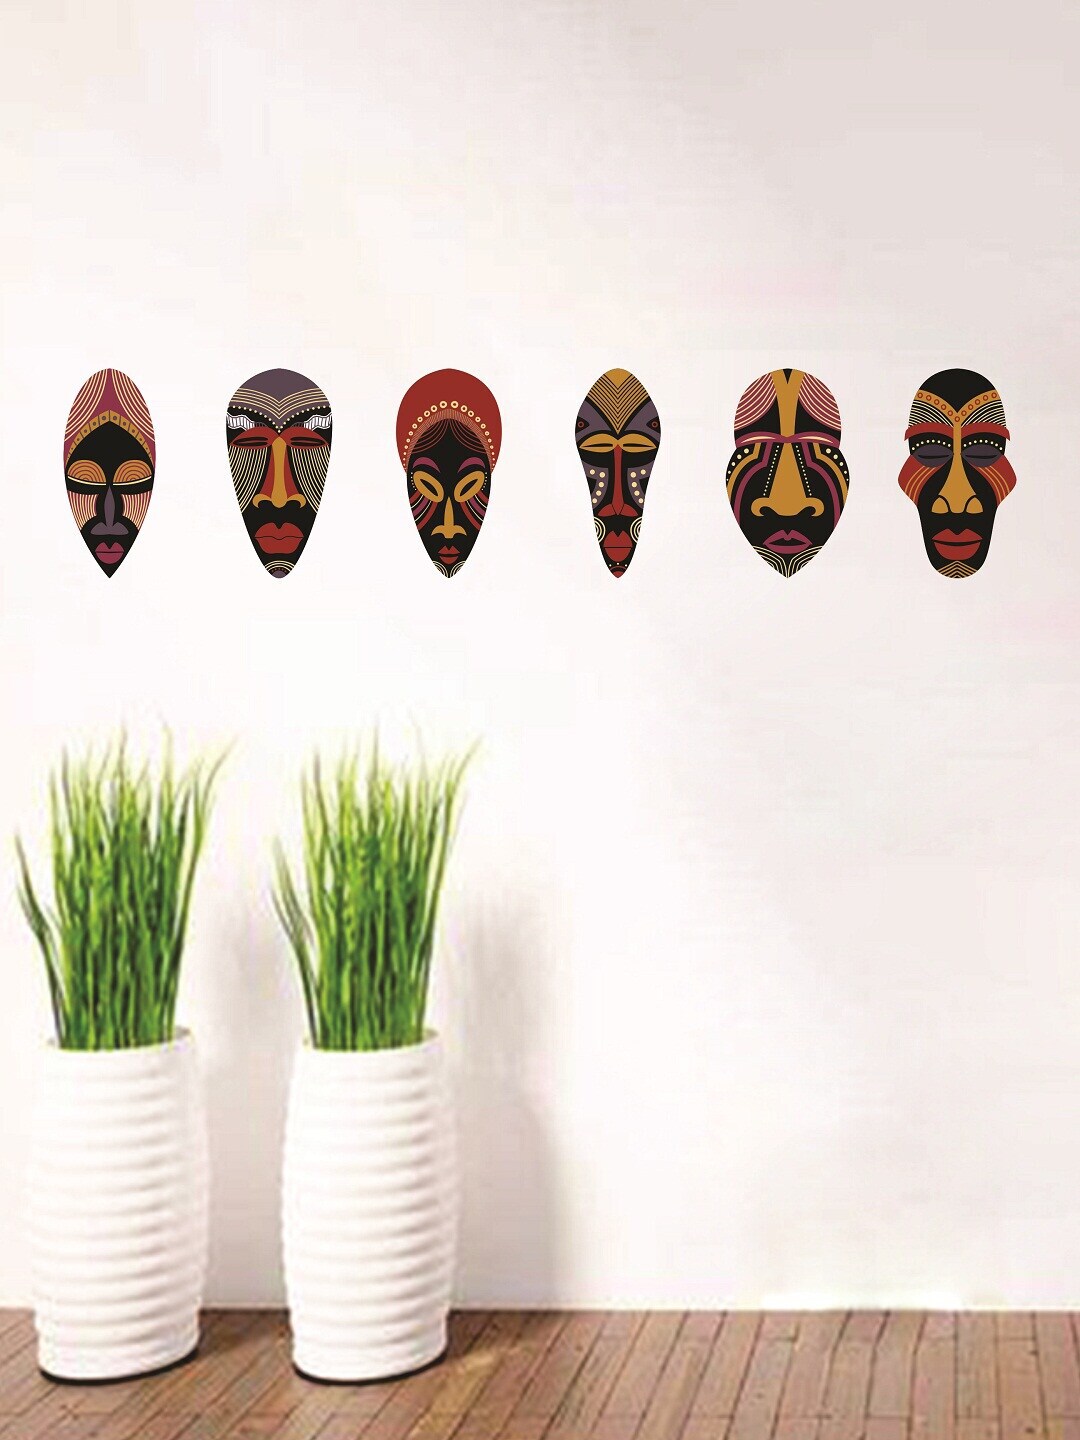 WALLSTICK Multicolored Tribal Faces Large Vinyl Wall Sticker Price in India